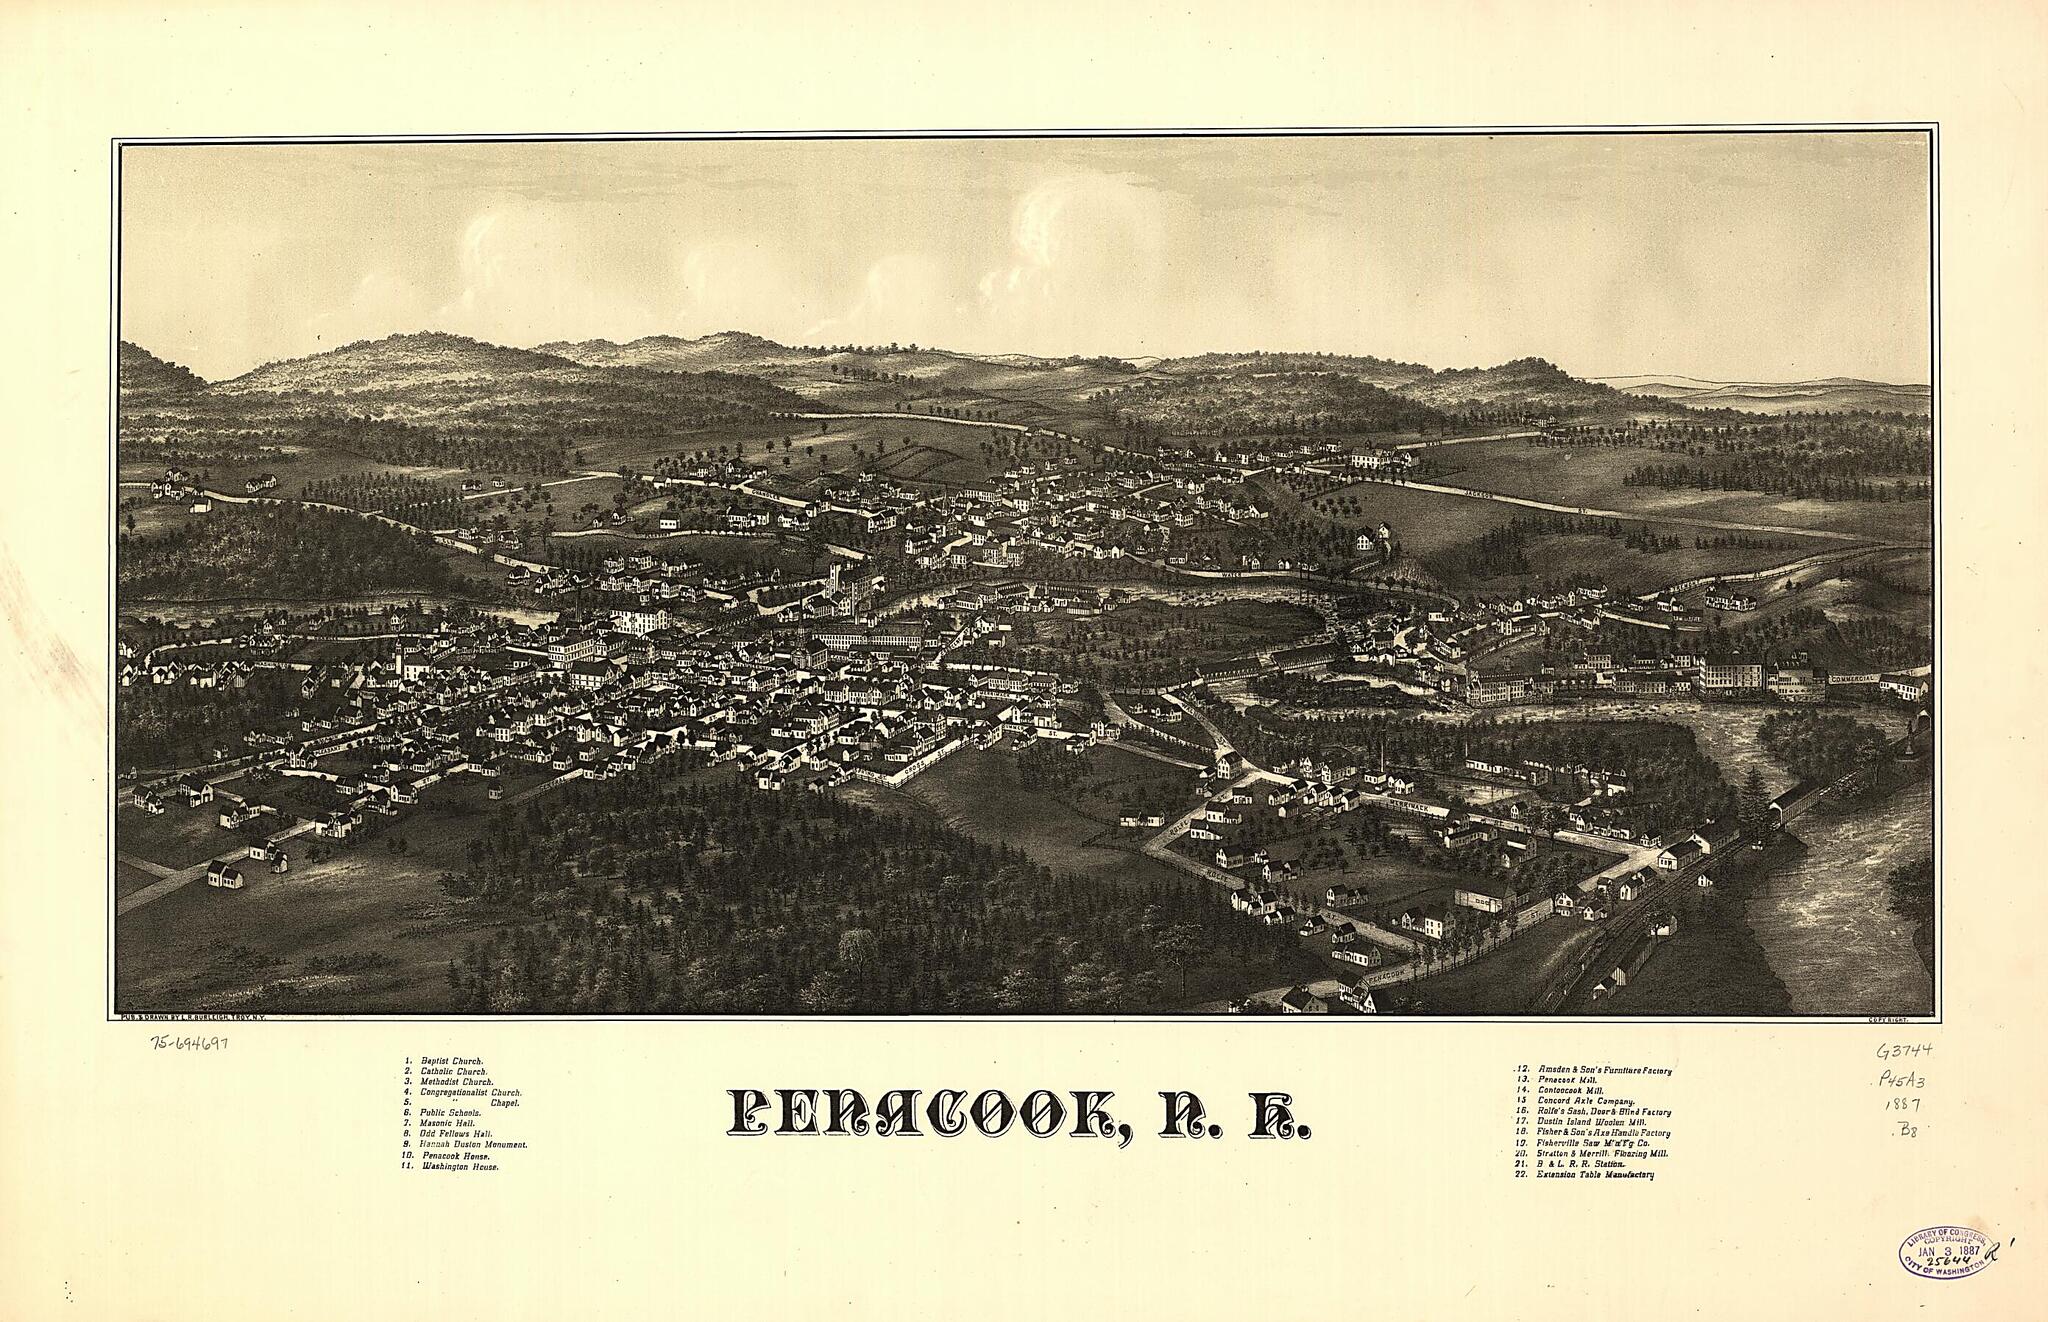 This old map of Penacook, New Hampshire from 1887 was created by L. R. (Lucien R.) Burleigh in 1887